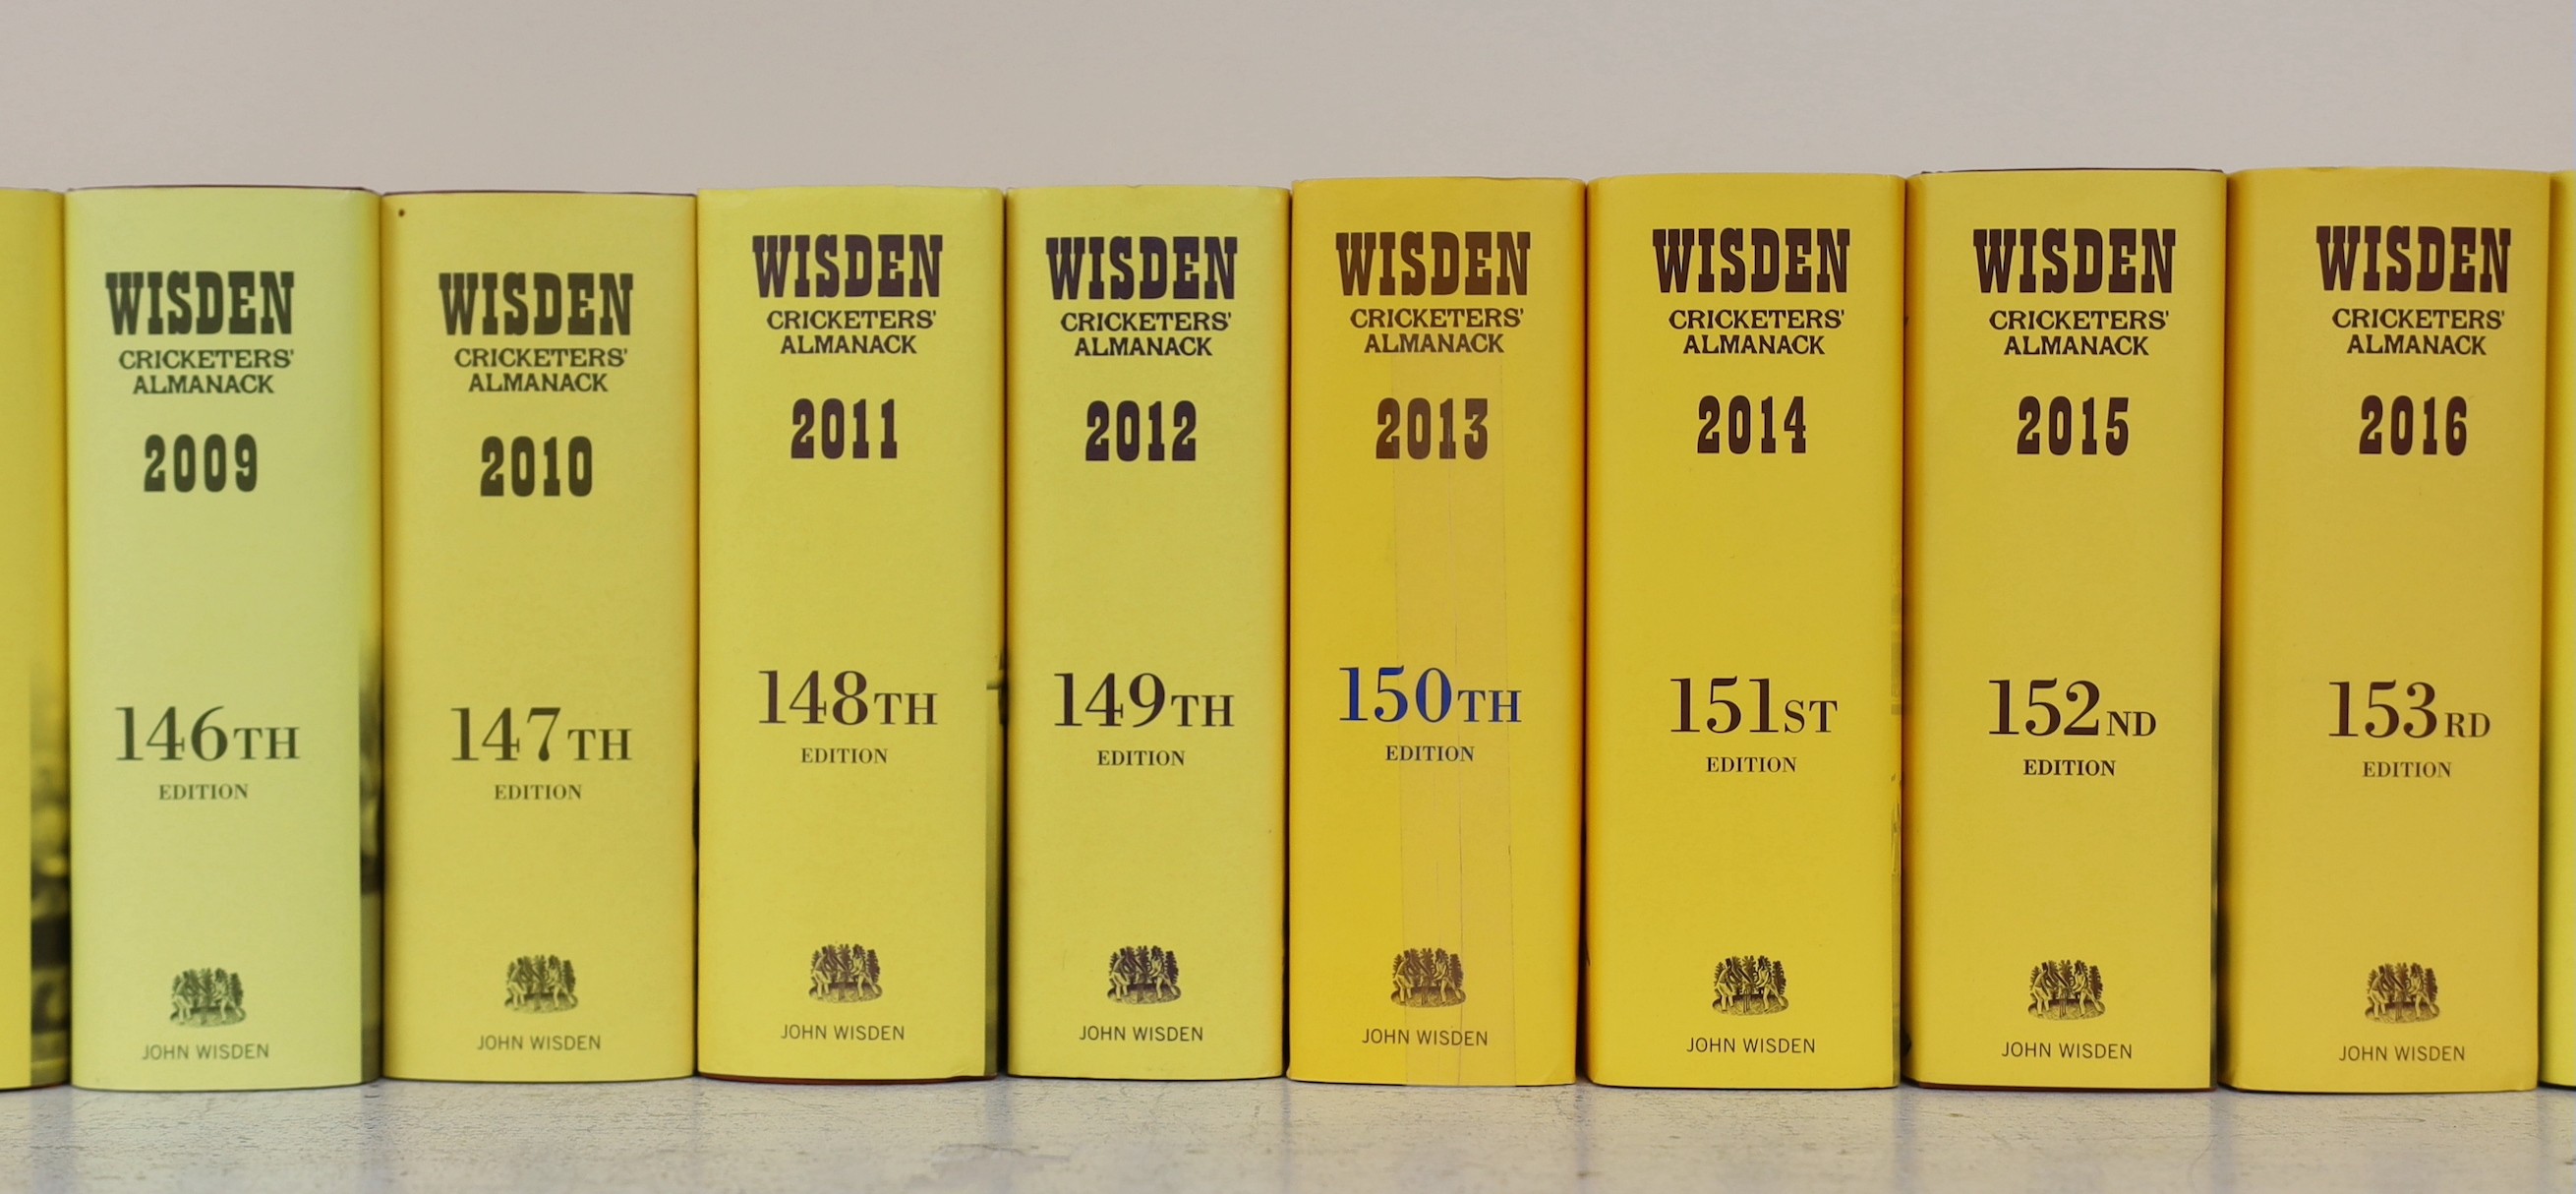 Wisden, John - Cricketers Almanack for the years 1975 (112th edition) - 2018 (155th edition), all hardbacks, with unclipped dust jackets. Together with - An Index to Wisden Cricketers’ Almanack 1864-1984 and Wisden ‘’Wha